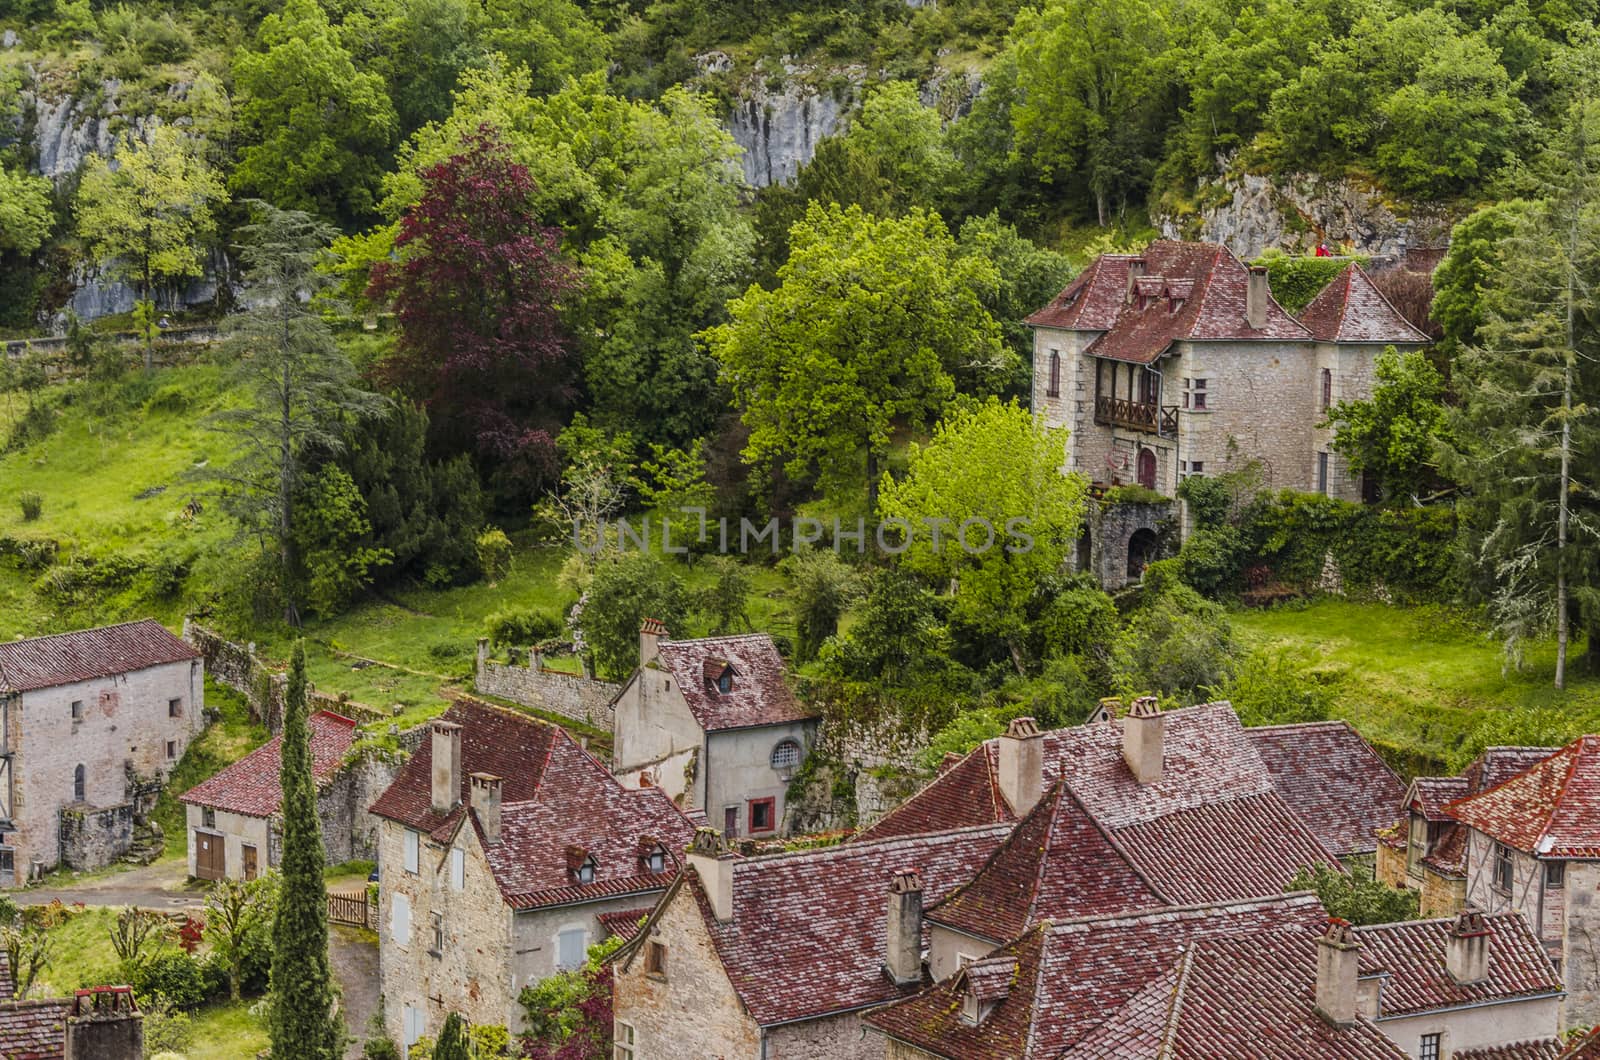 you can see the houses, the vegetation and the calcareous mountains background that surround the beautiful village of saint cirq lapopie in the south of france